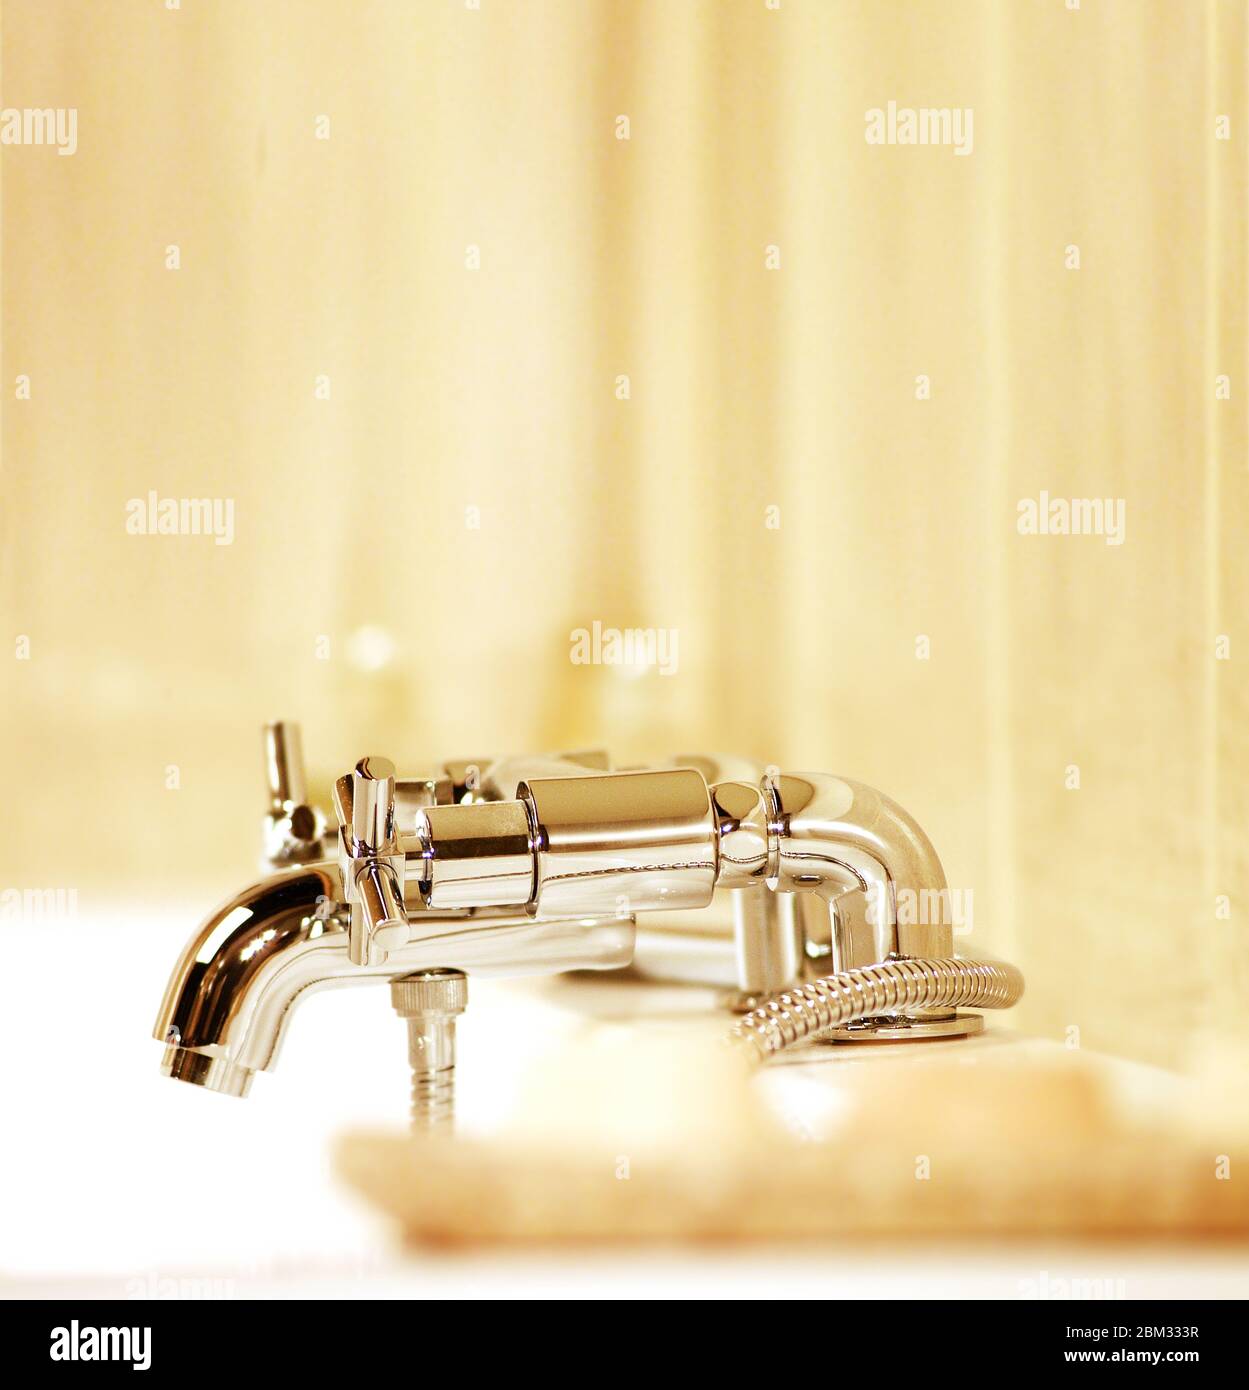 Close-up of a hot and cold mixer faucet on bathtub in a bathroom Stock Photo